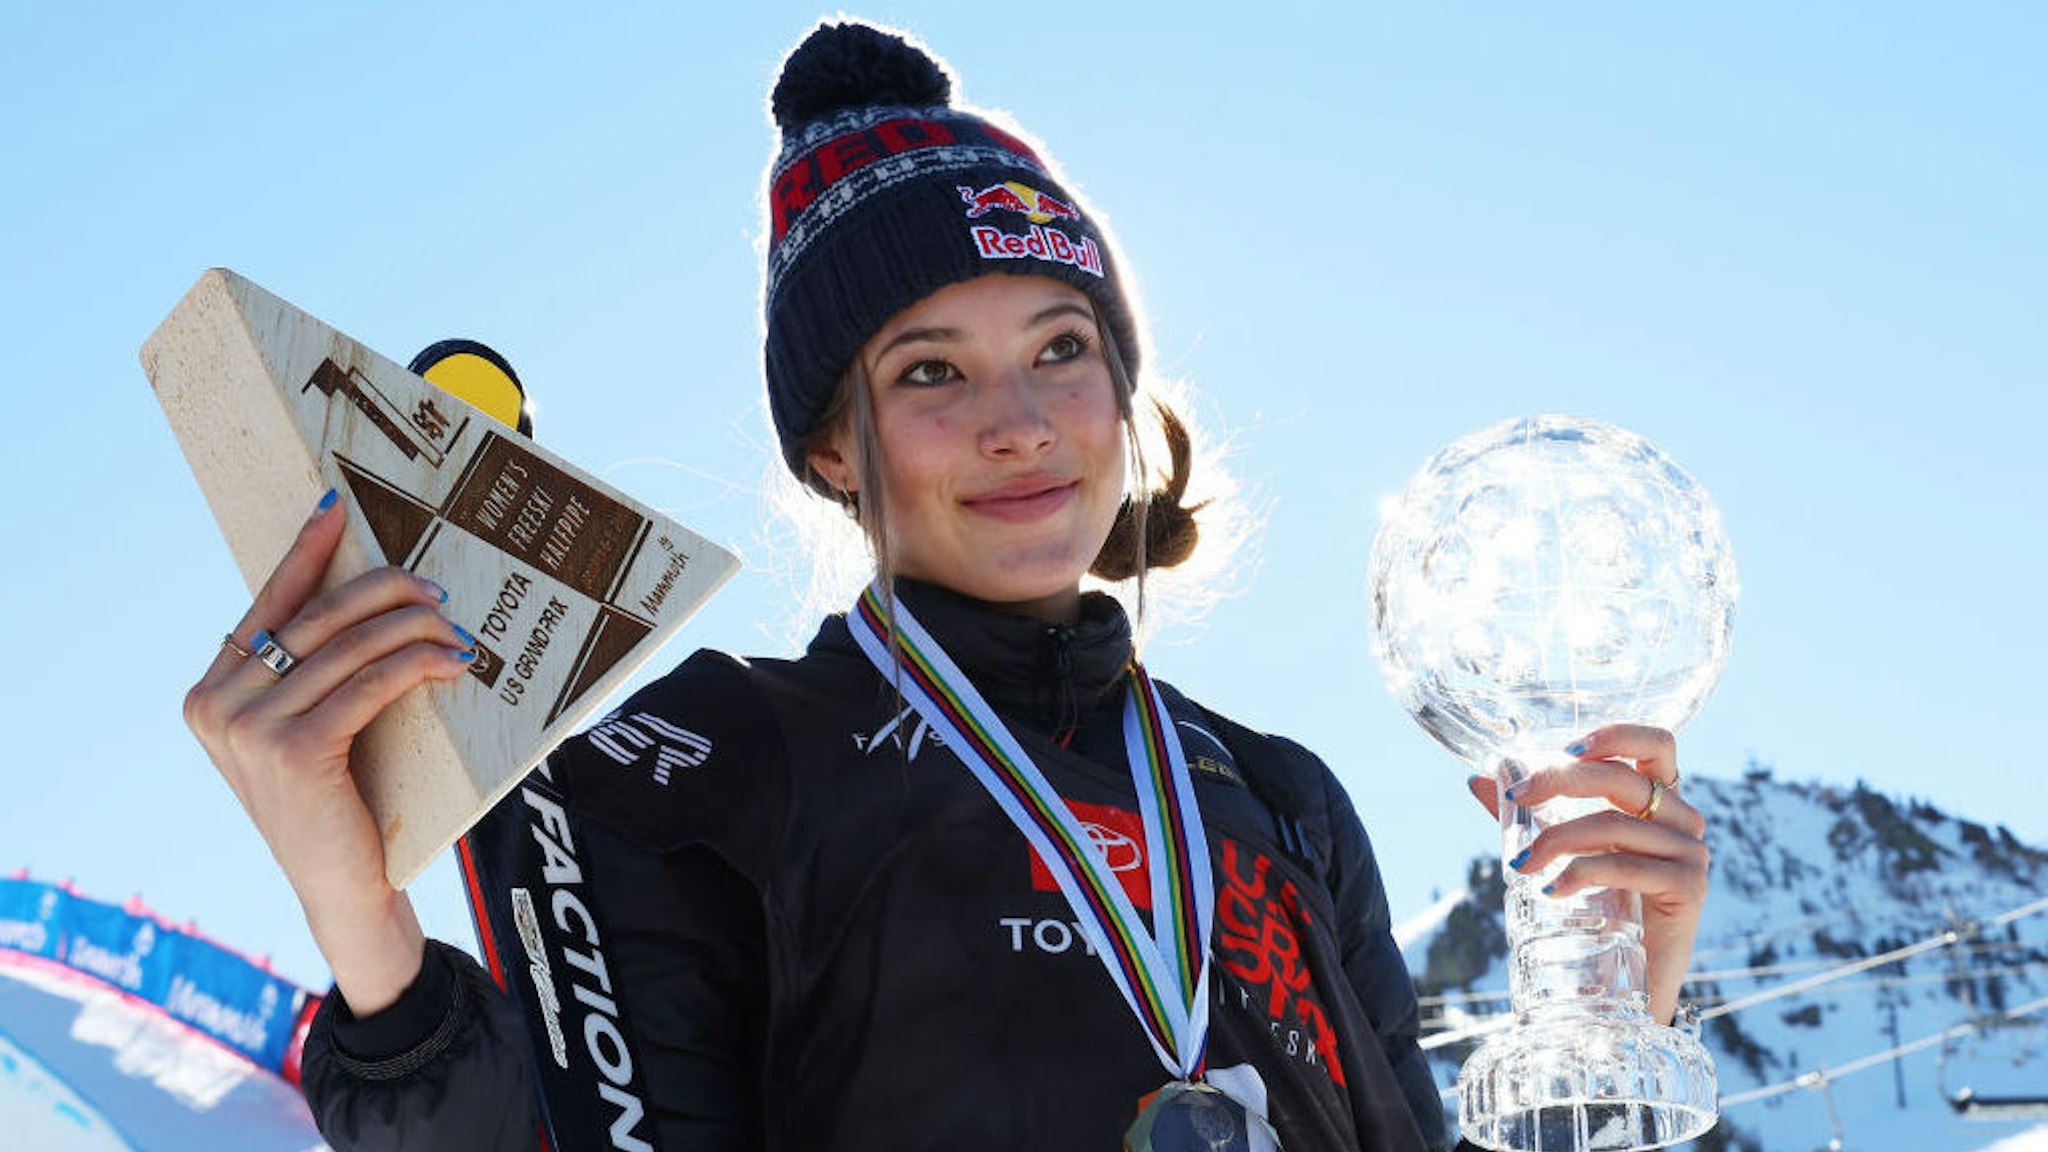 MAMMOTH, CALIFORNIA - JANUARY 08: Ailing Eileen Gu of Team China poses for a picture after placing first in the Women's Freeski Halfpipe competition at the Toyota U.S. Grand Prix at Mammoth Mountain on January 08, 2022 in Mammoth, California. (Photo by Maddie Meyer/Getty Images)